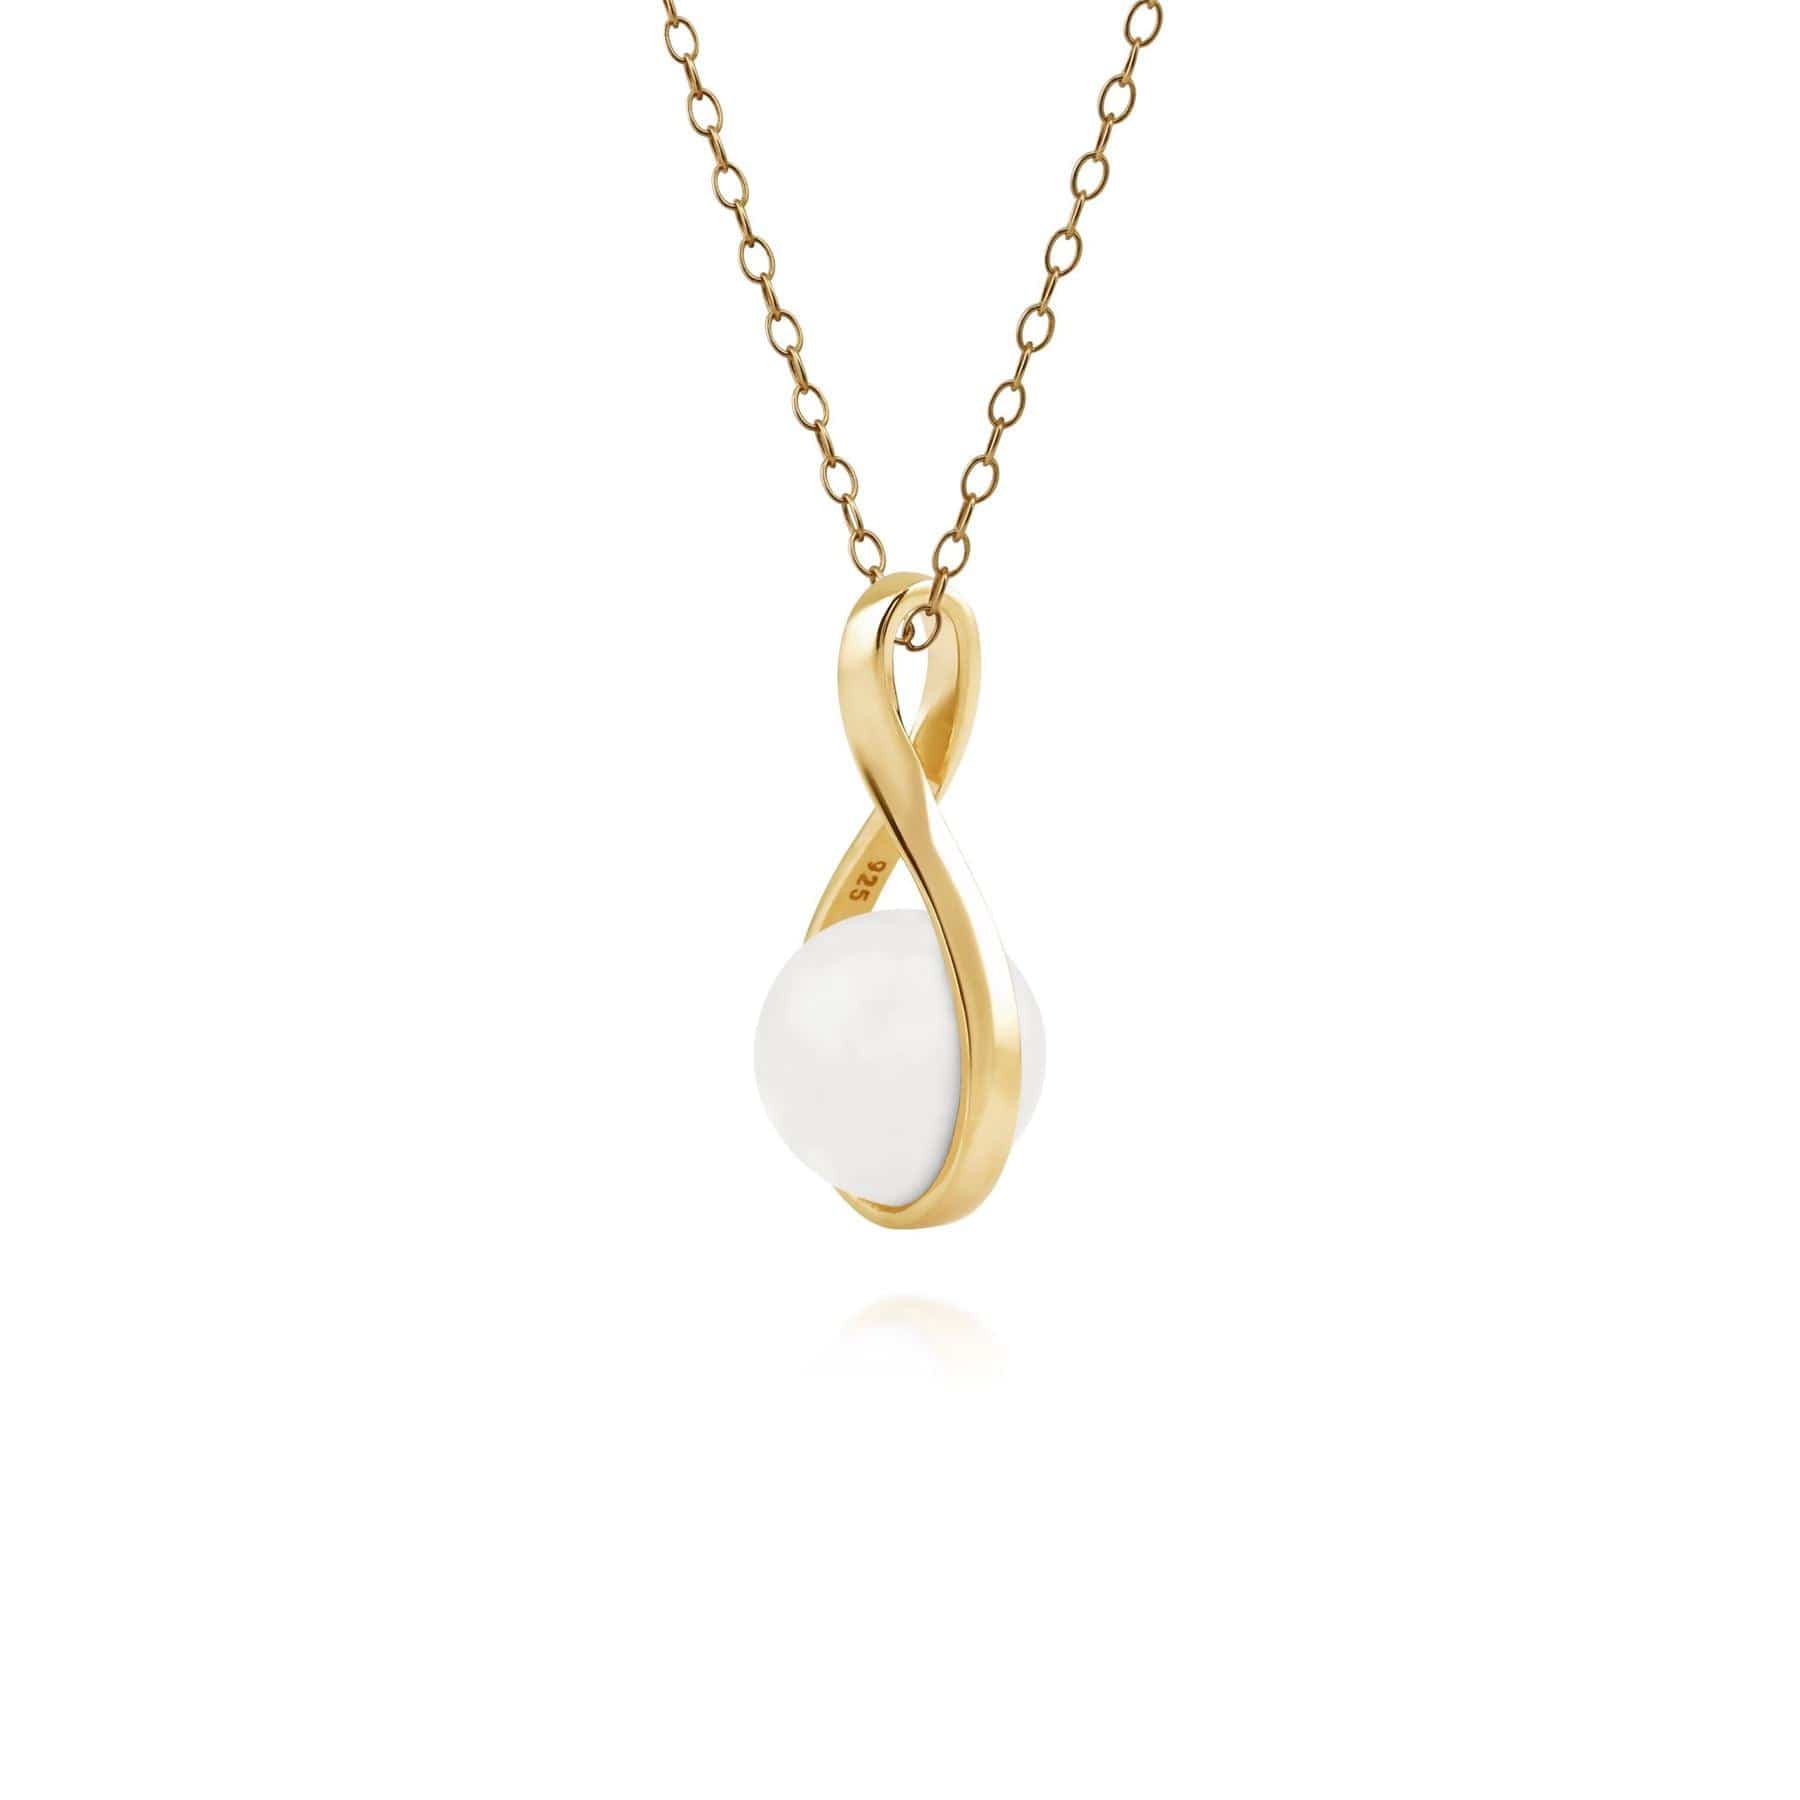 Kosmos Agate Orb Pendant in Yellow Gold Plated Sterling Silver - Gemondo